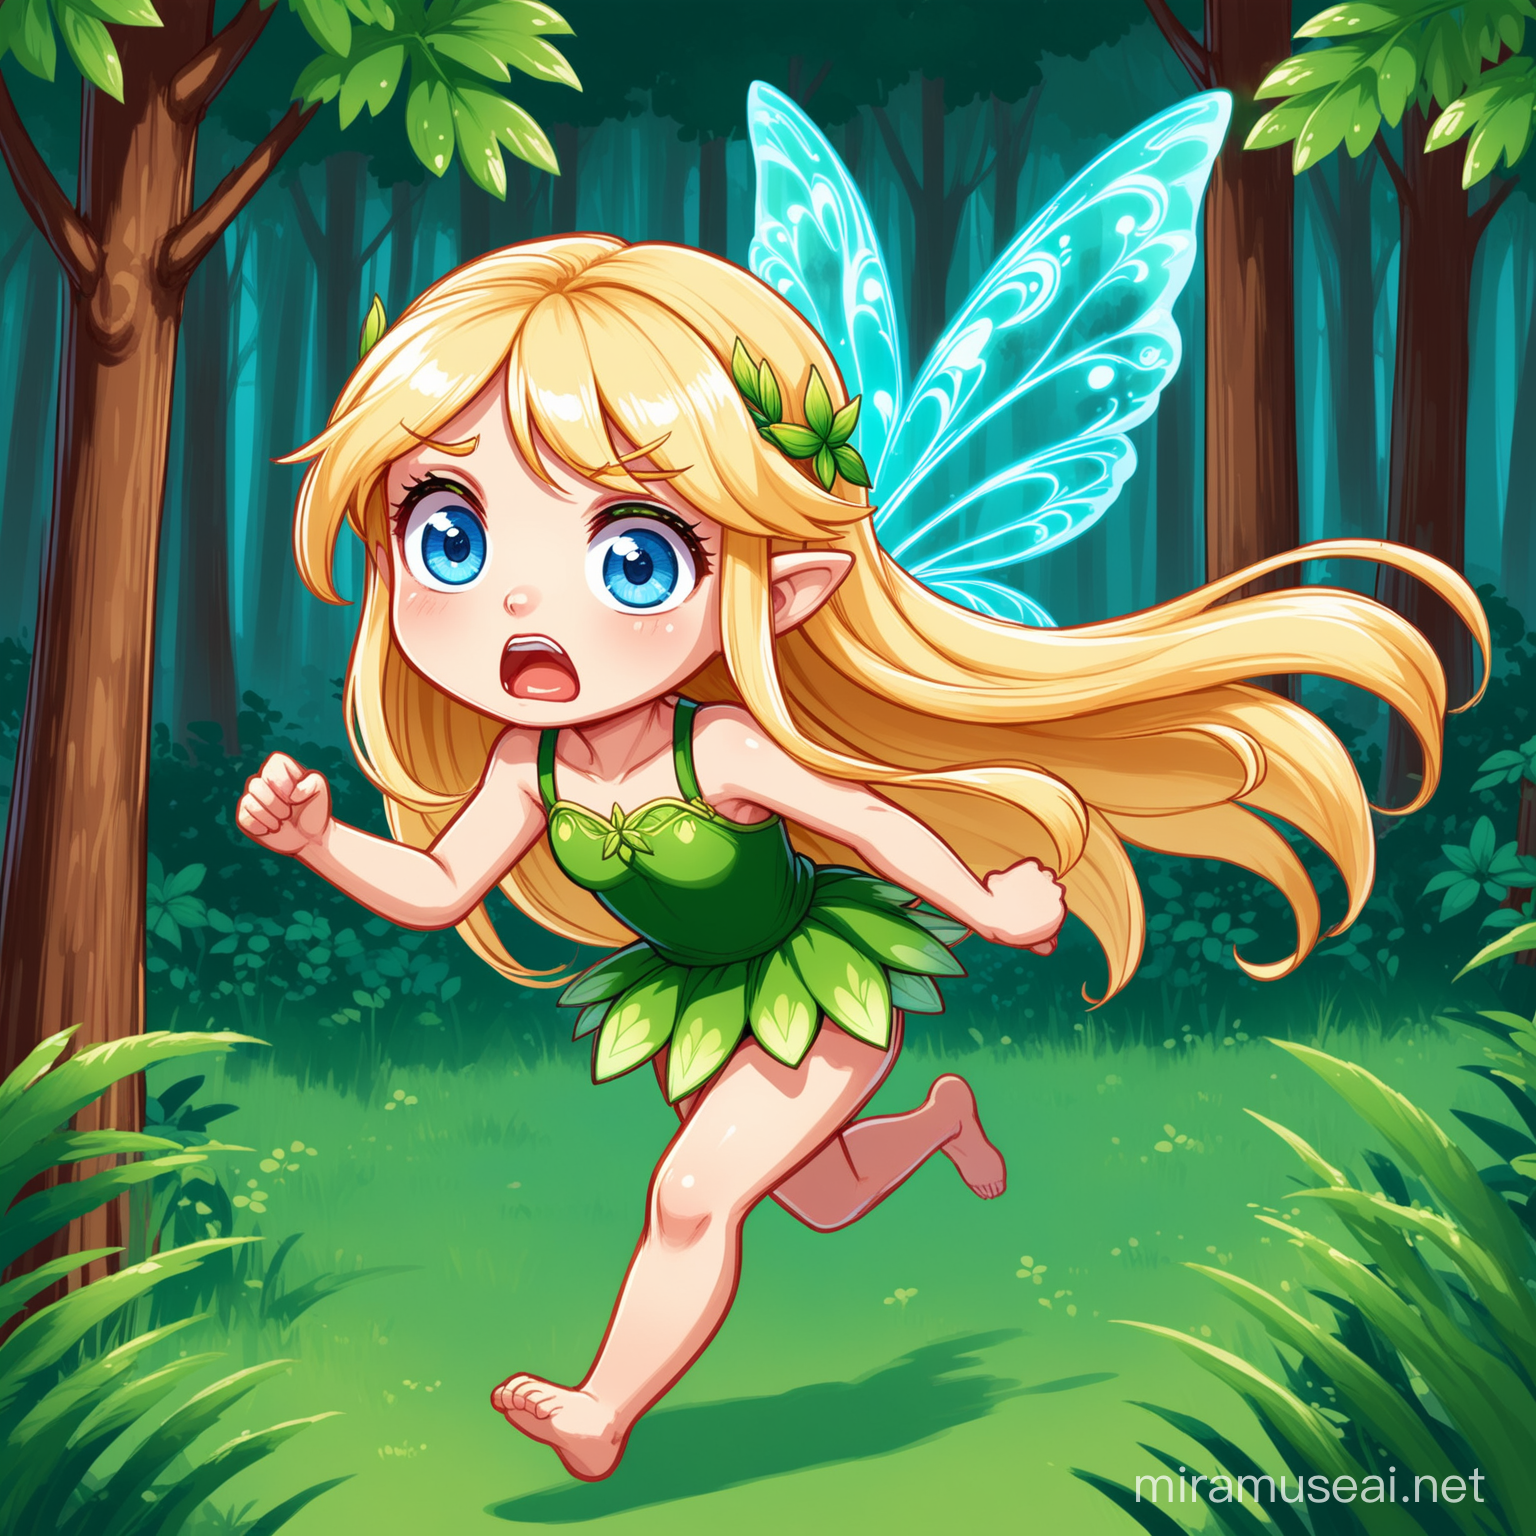 imagine poseable prompts, small forest fairy in cartoon style with long blonde hair and big blue eyes running, worried look,  no background